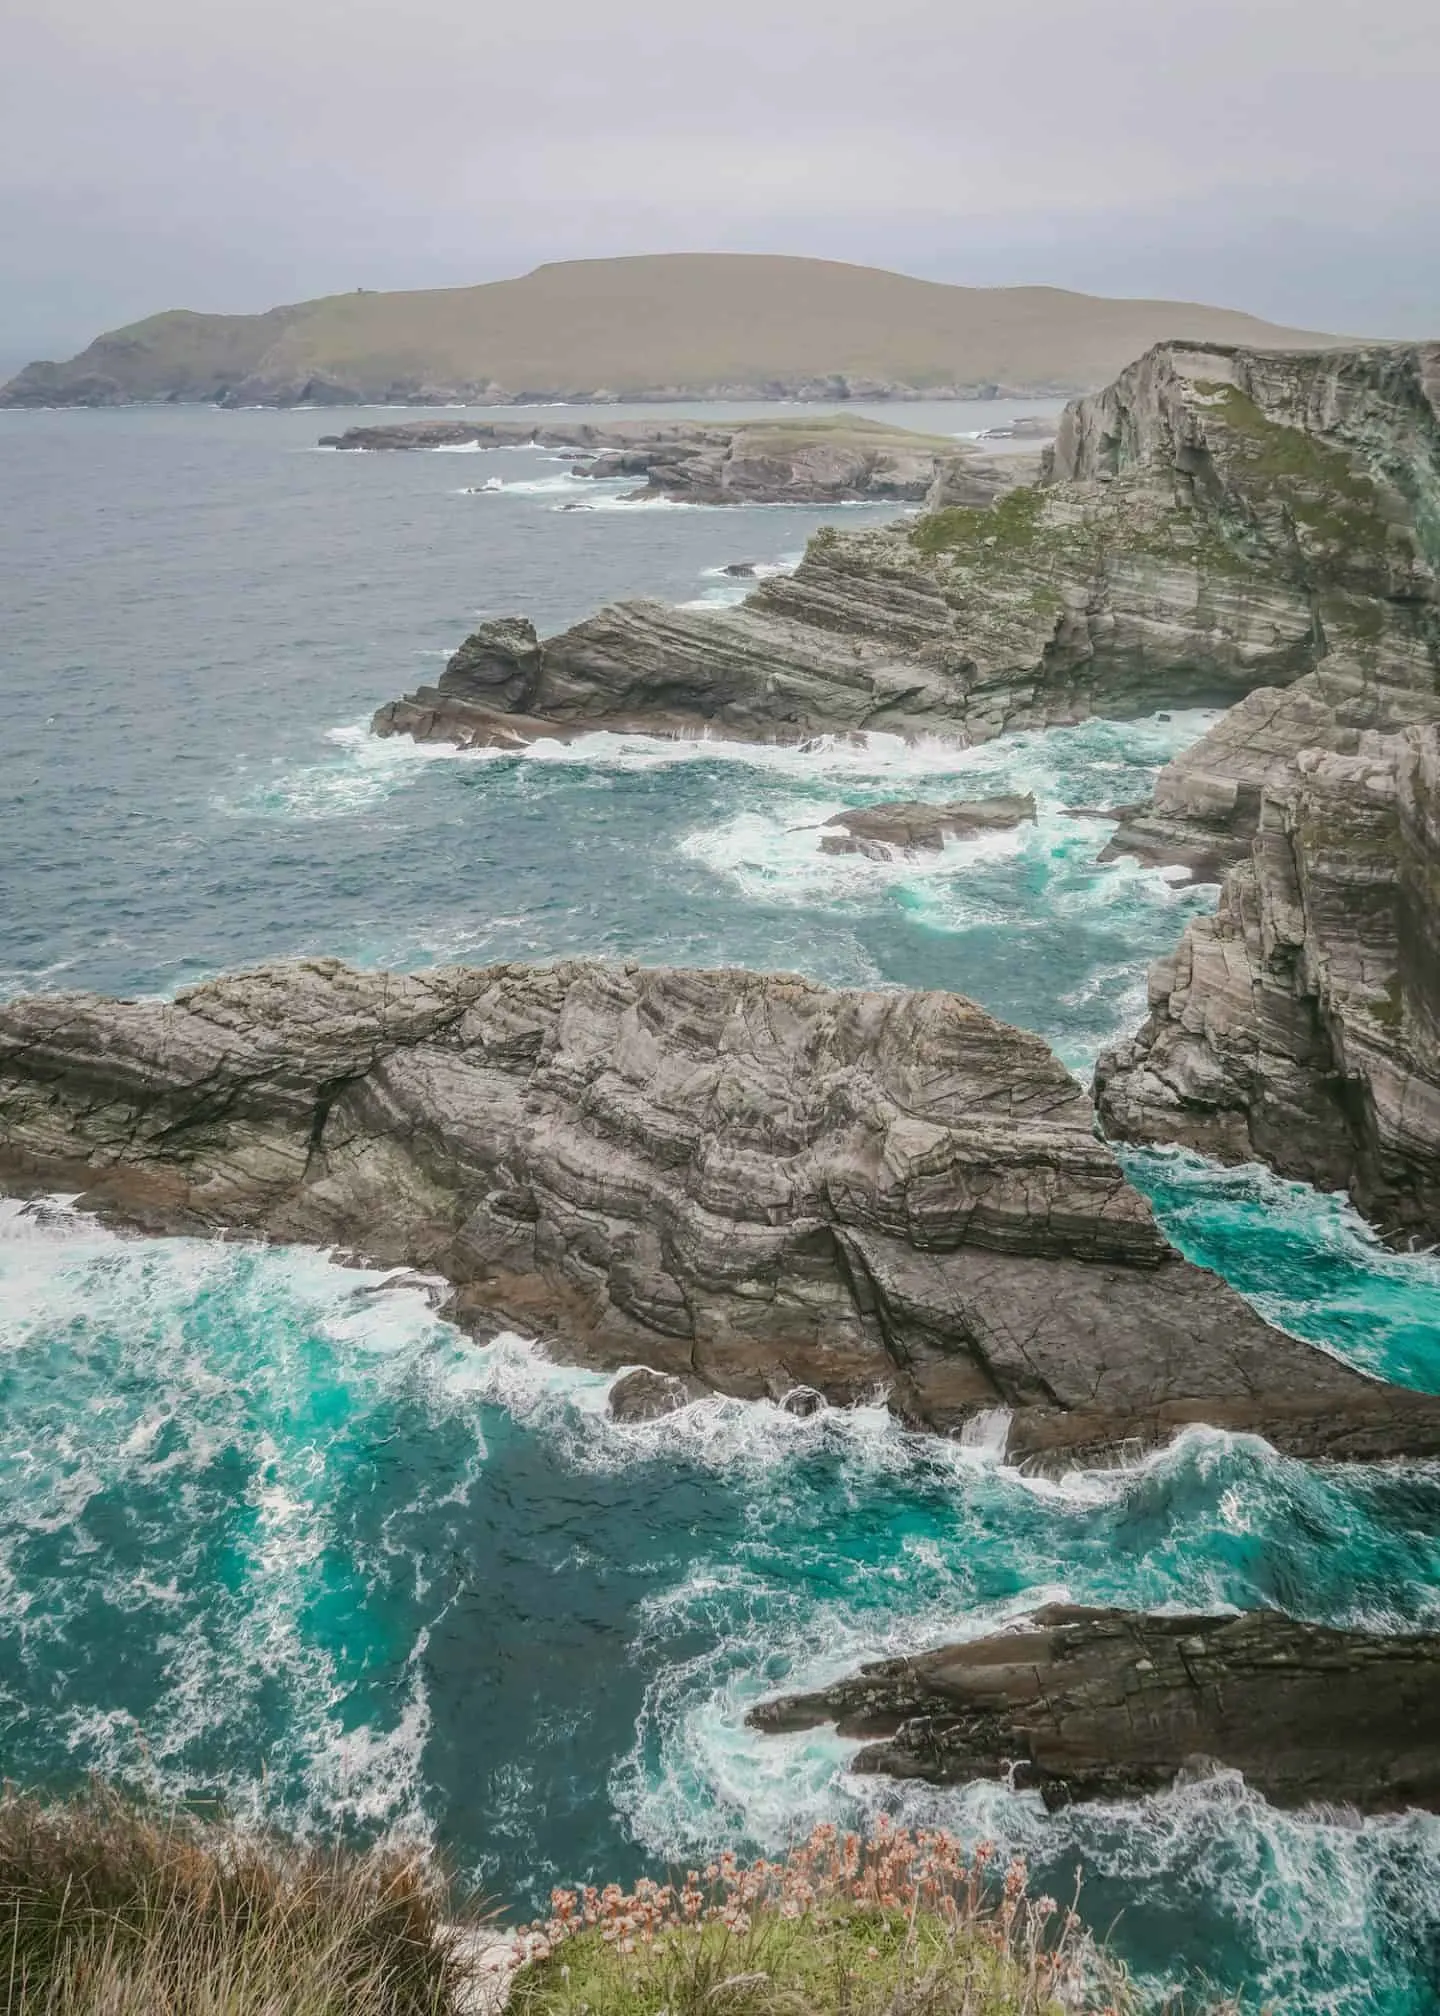 Kerry Cliffs is worth a stop along the Ring of Kerry drive during your Ireland road trip itinerary